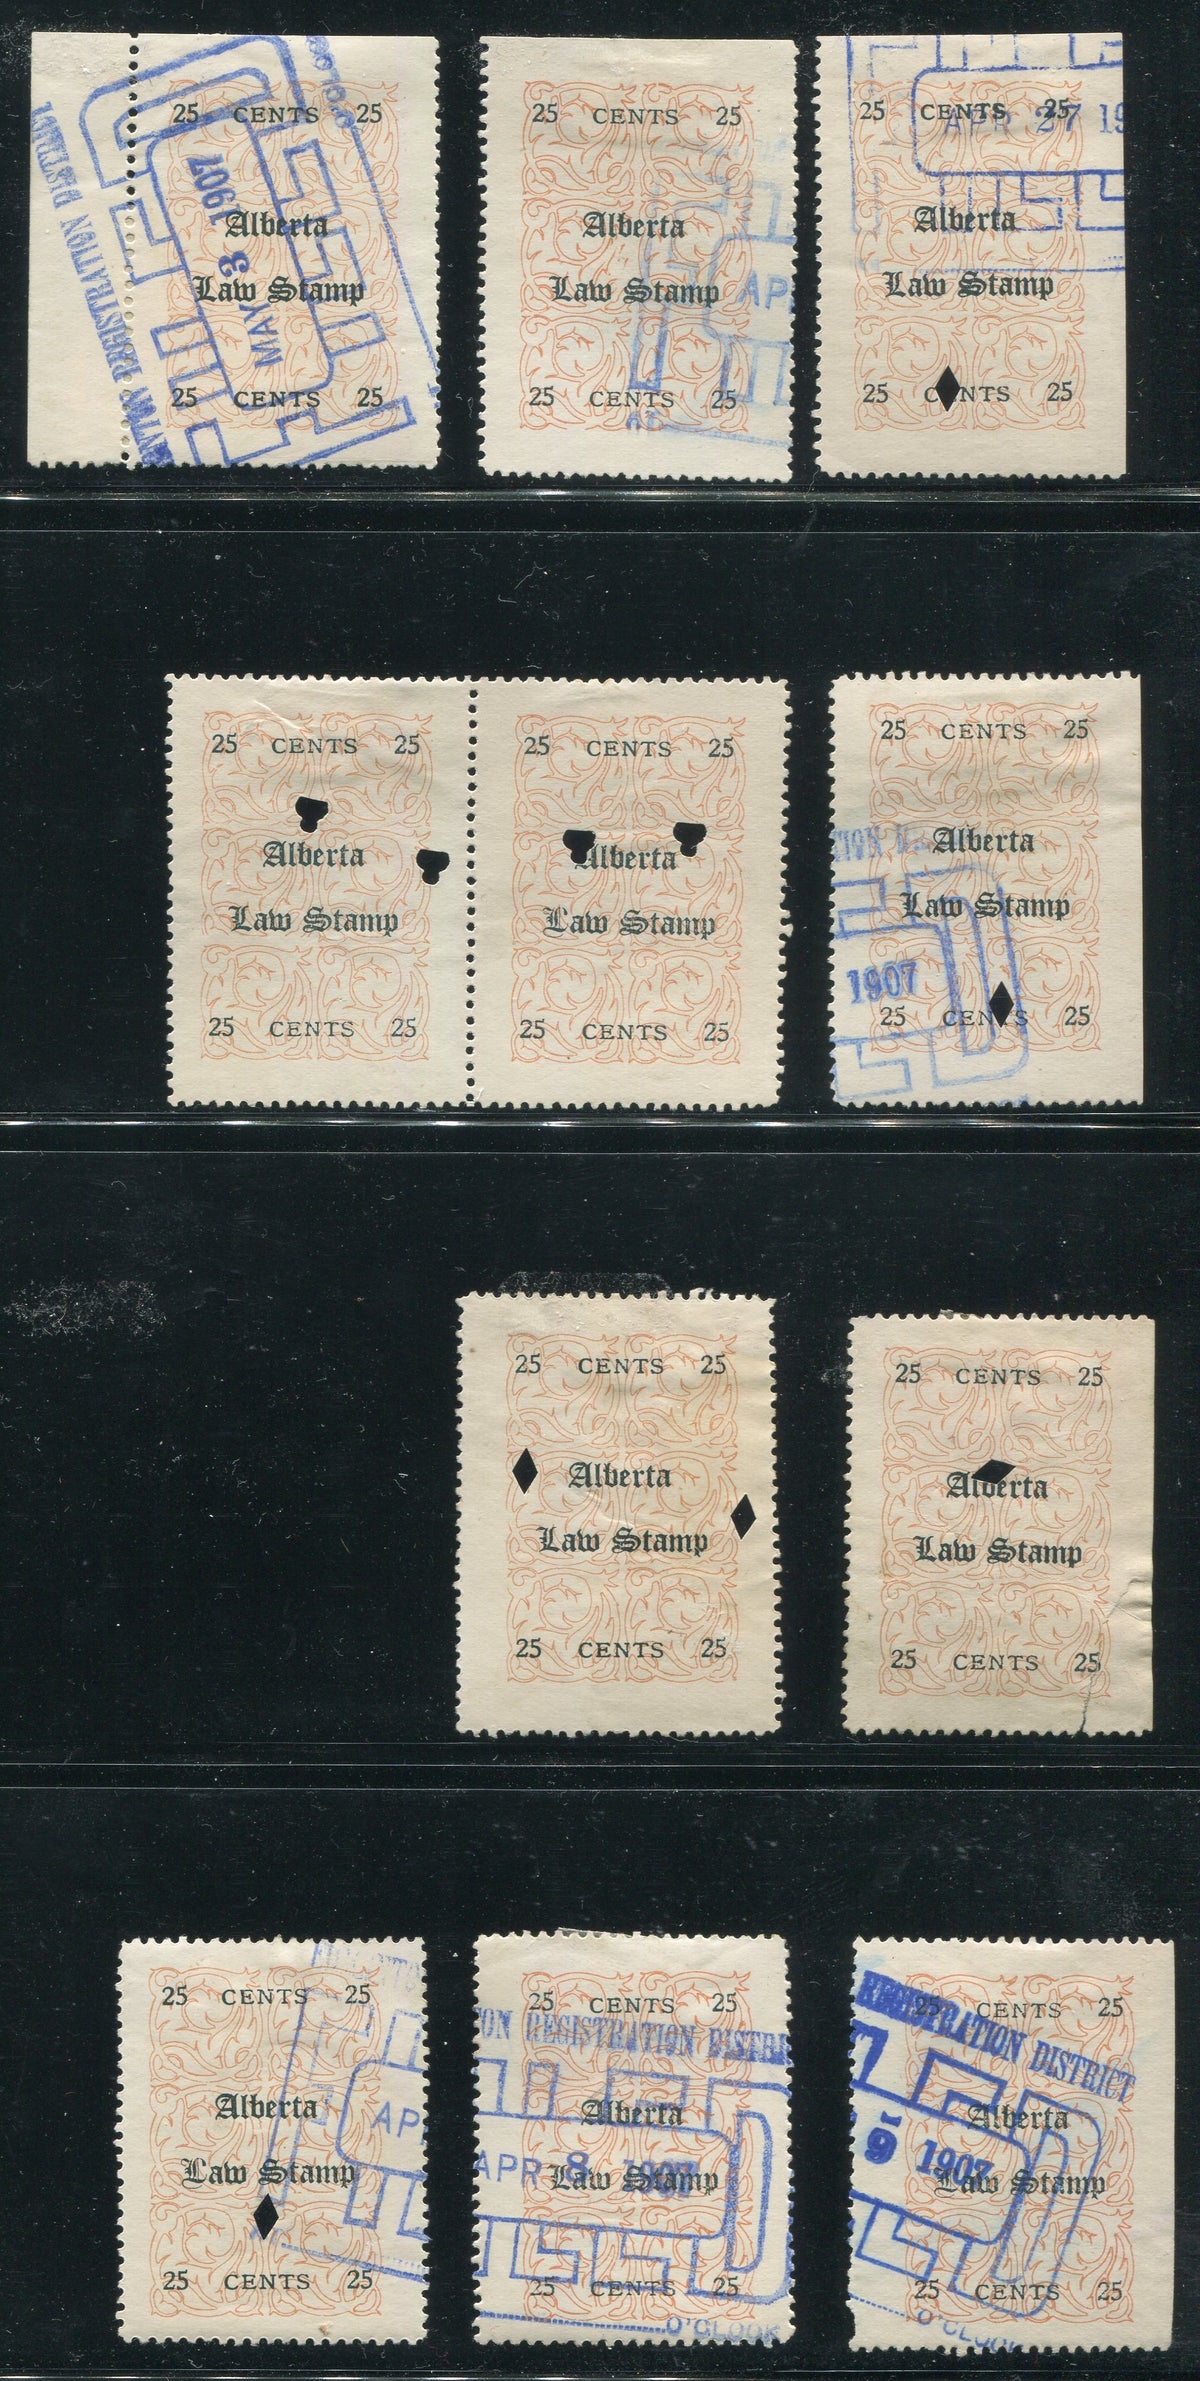 0006AL2010 - AL6 - Used Partially Reconstructed Sheet